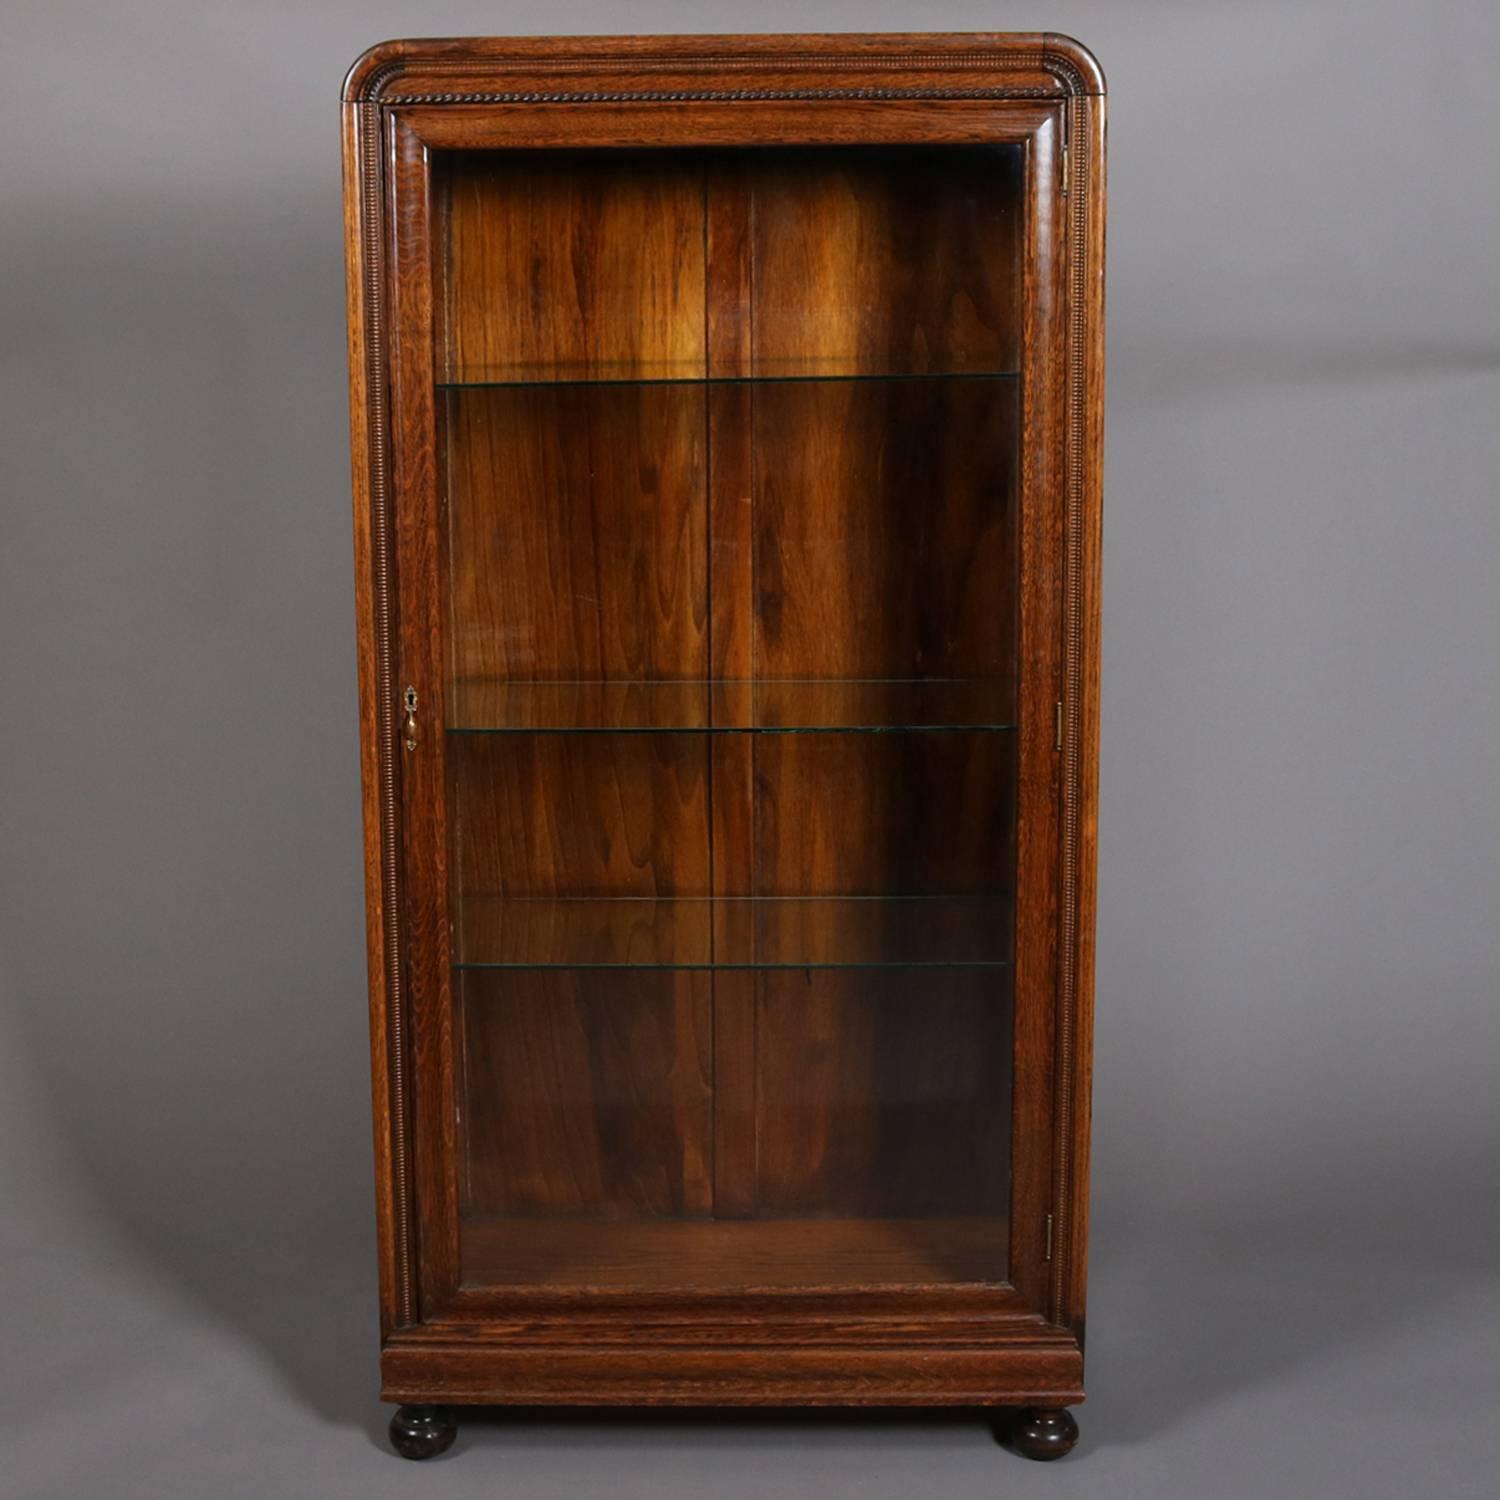 Antique oak display cabinet features single door opening to glass shelved interior and seated on ball feet, 20th century

Measures - 59.5